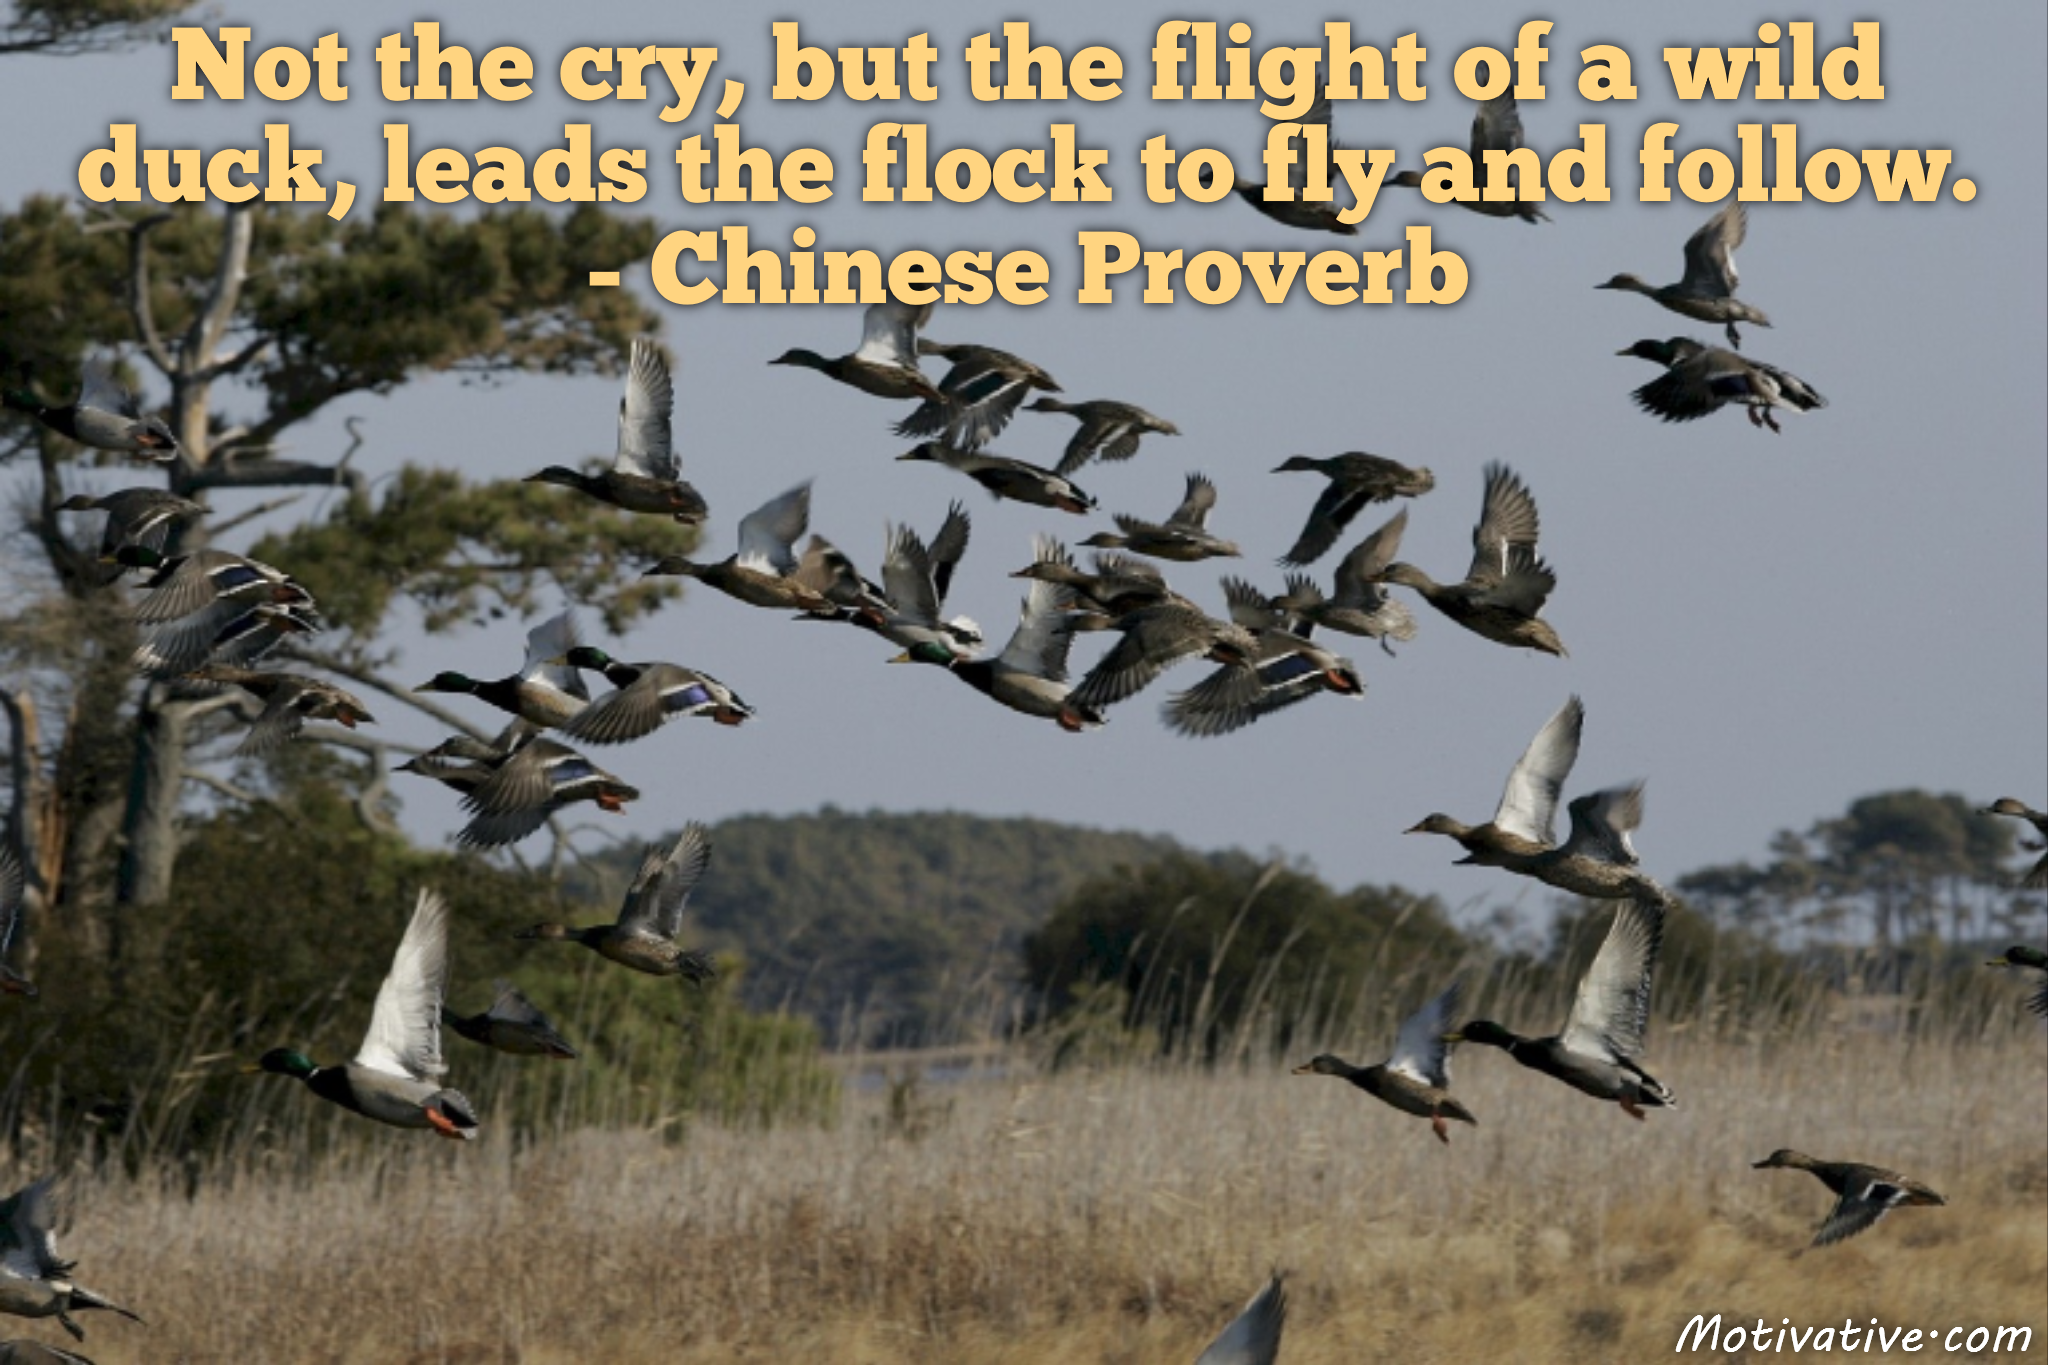 Not the cry, but the flight of a wild duck, leads the flock to fly and follow. – Chinese Proverb